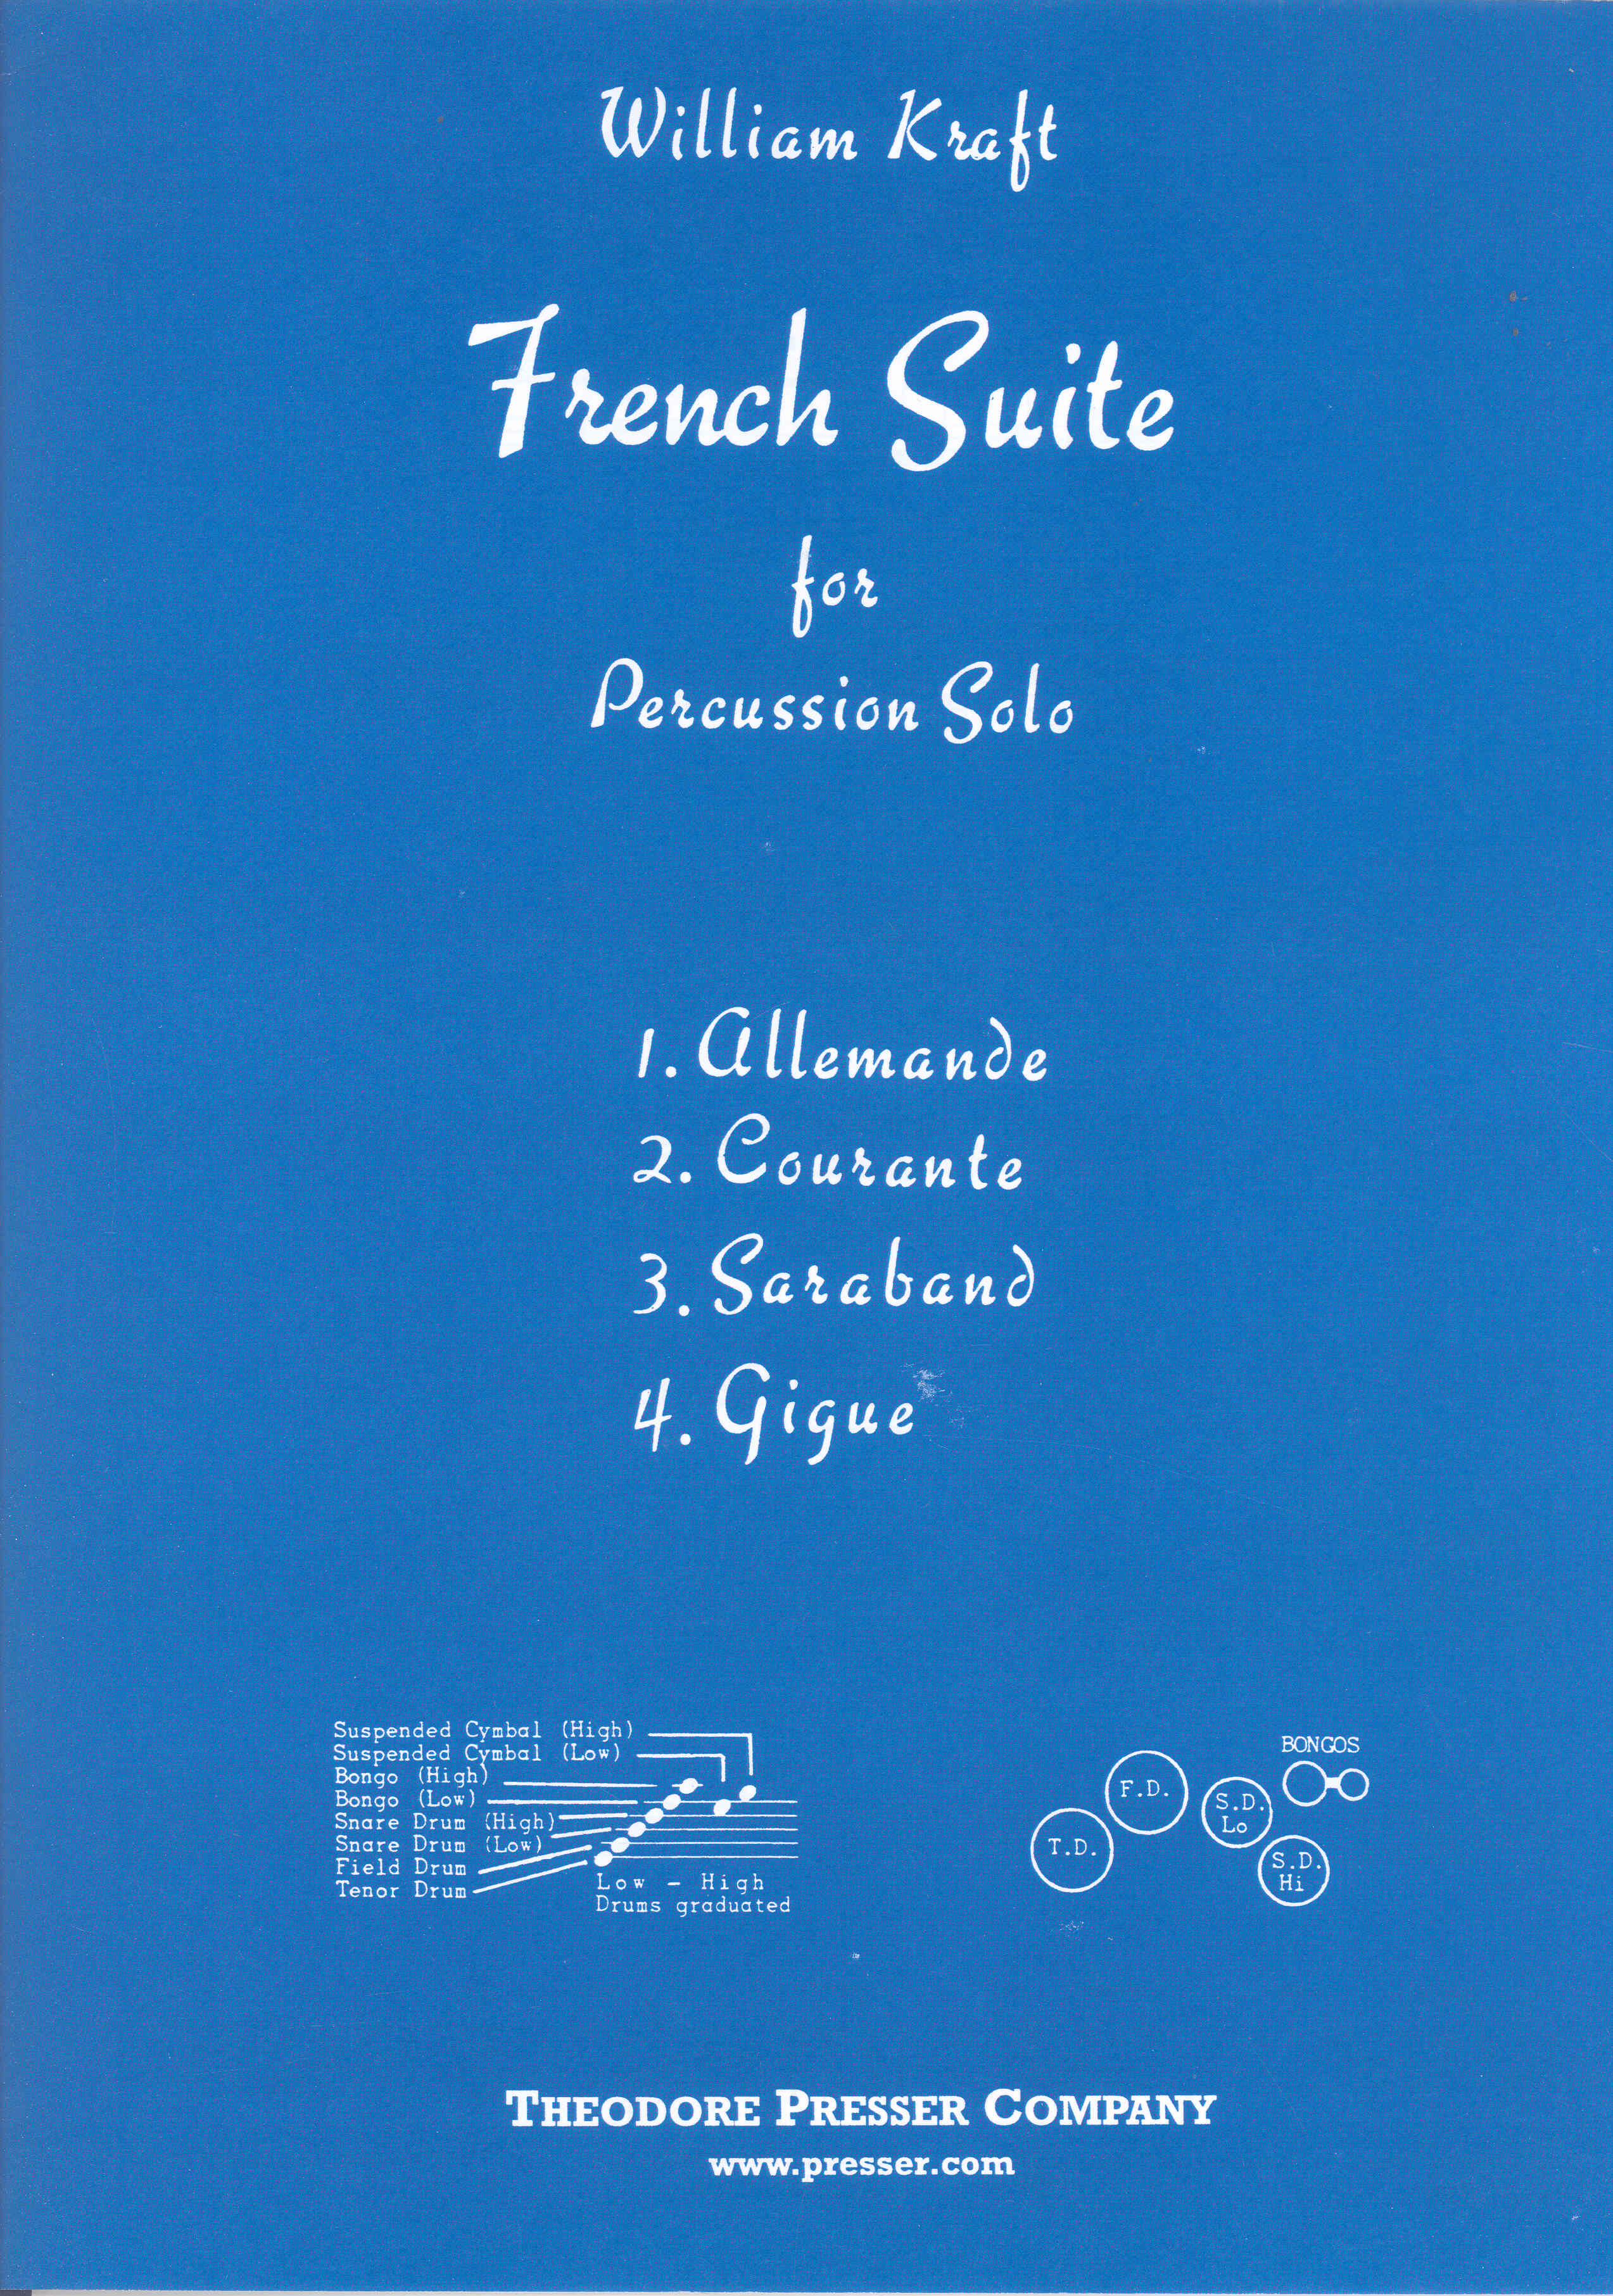 Kraft French Suite Percussion Solo Sheet Music Songbook